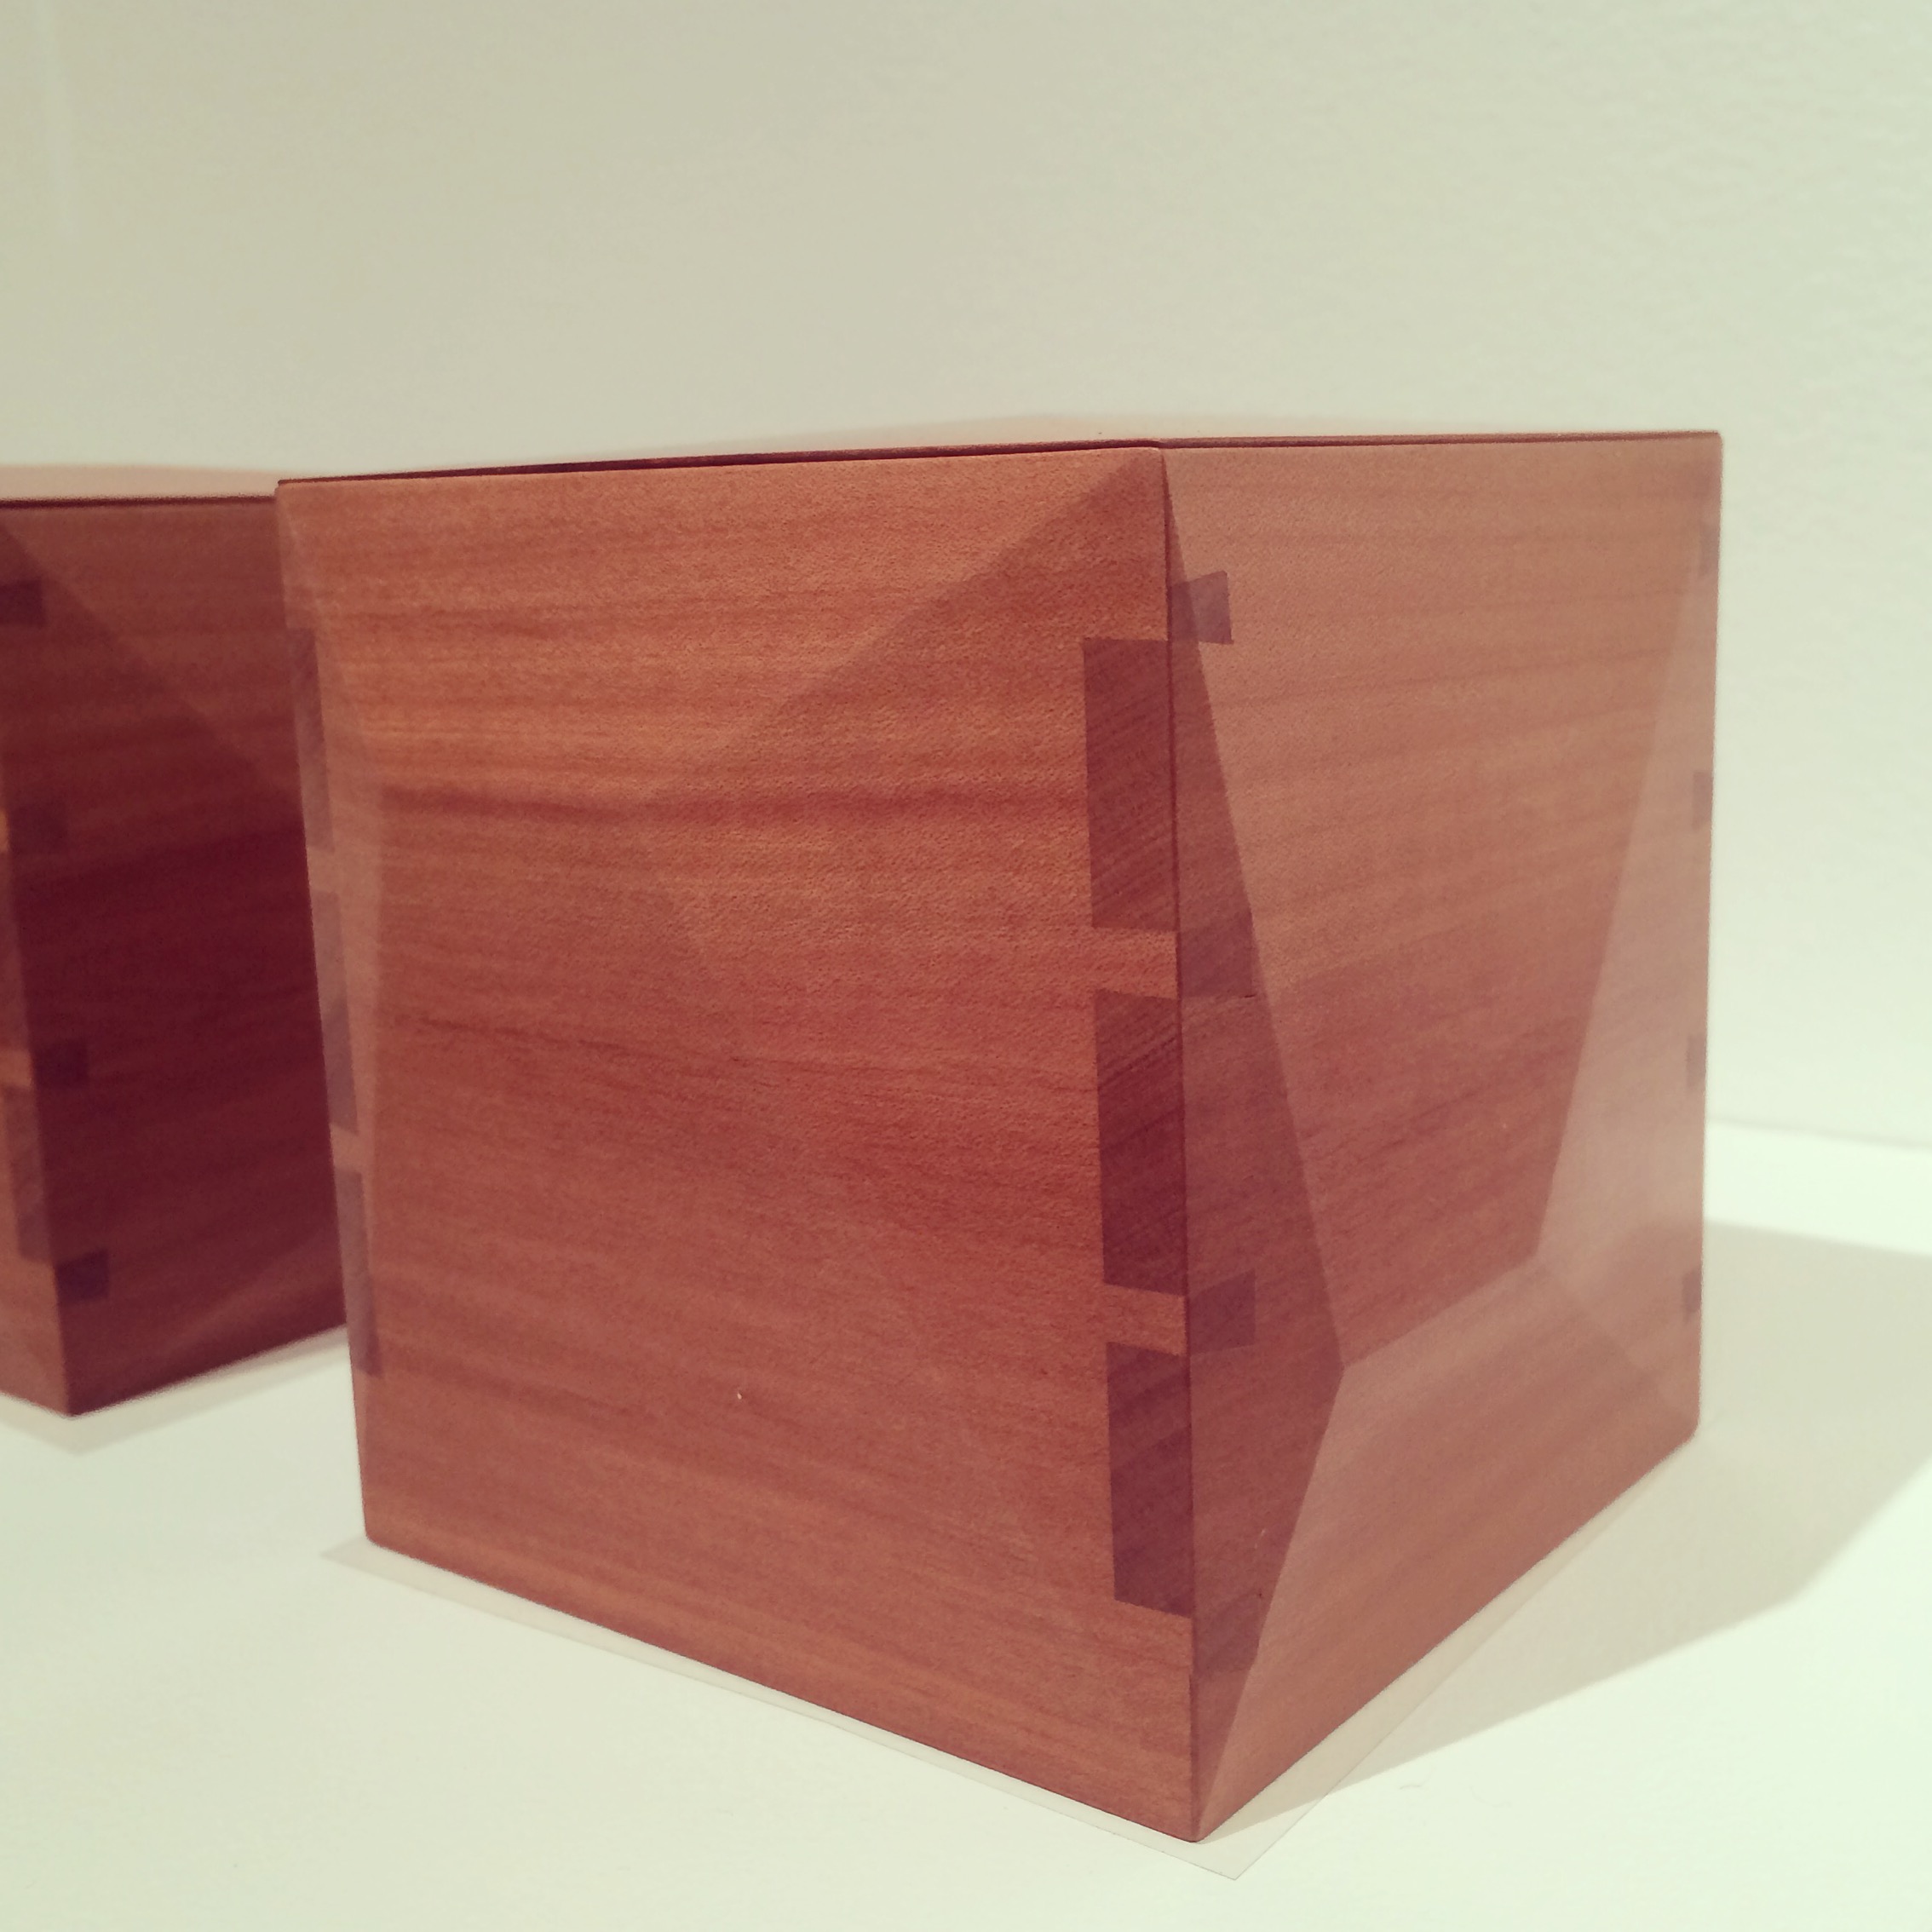 Laura Mays Facet Boxes